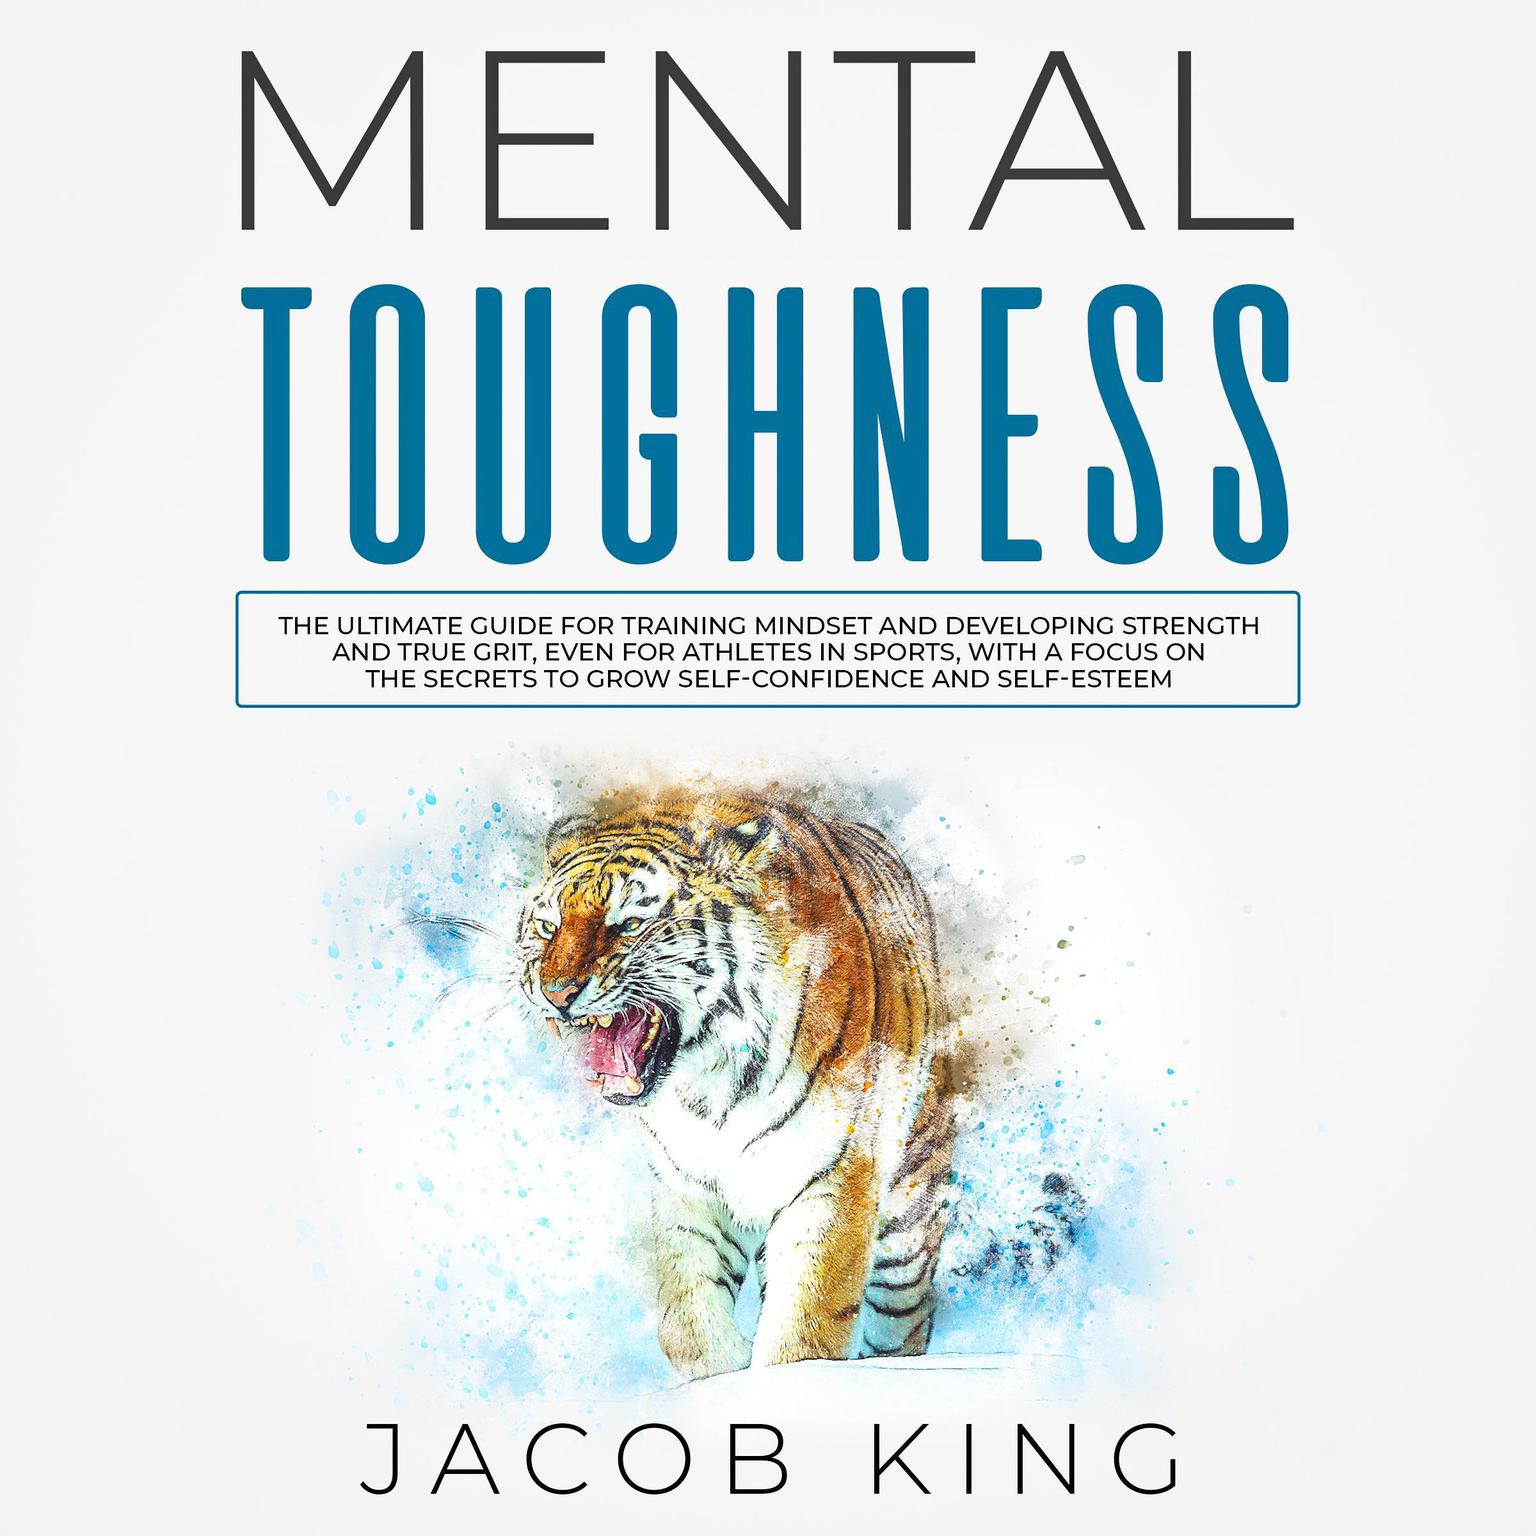 Mental Toughness: The Ultimate Guide for Training Mindset and Developing Strength and True Grit, Even for Athletes in Sports, With a Focus on the Secrets to Grow Self-Confidence and Self-Esteem Audiobook, by Jacob King